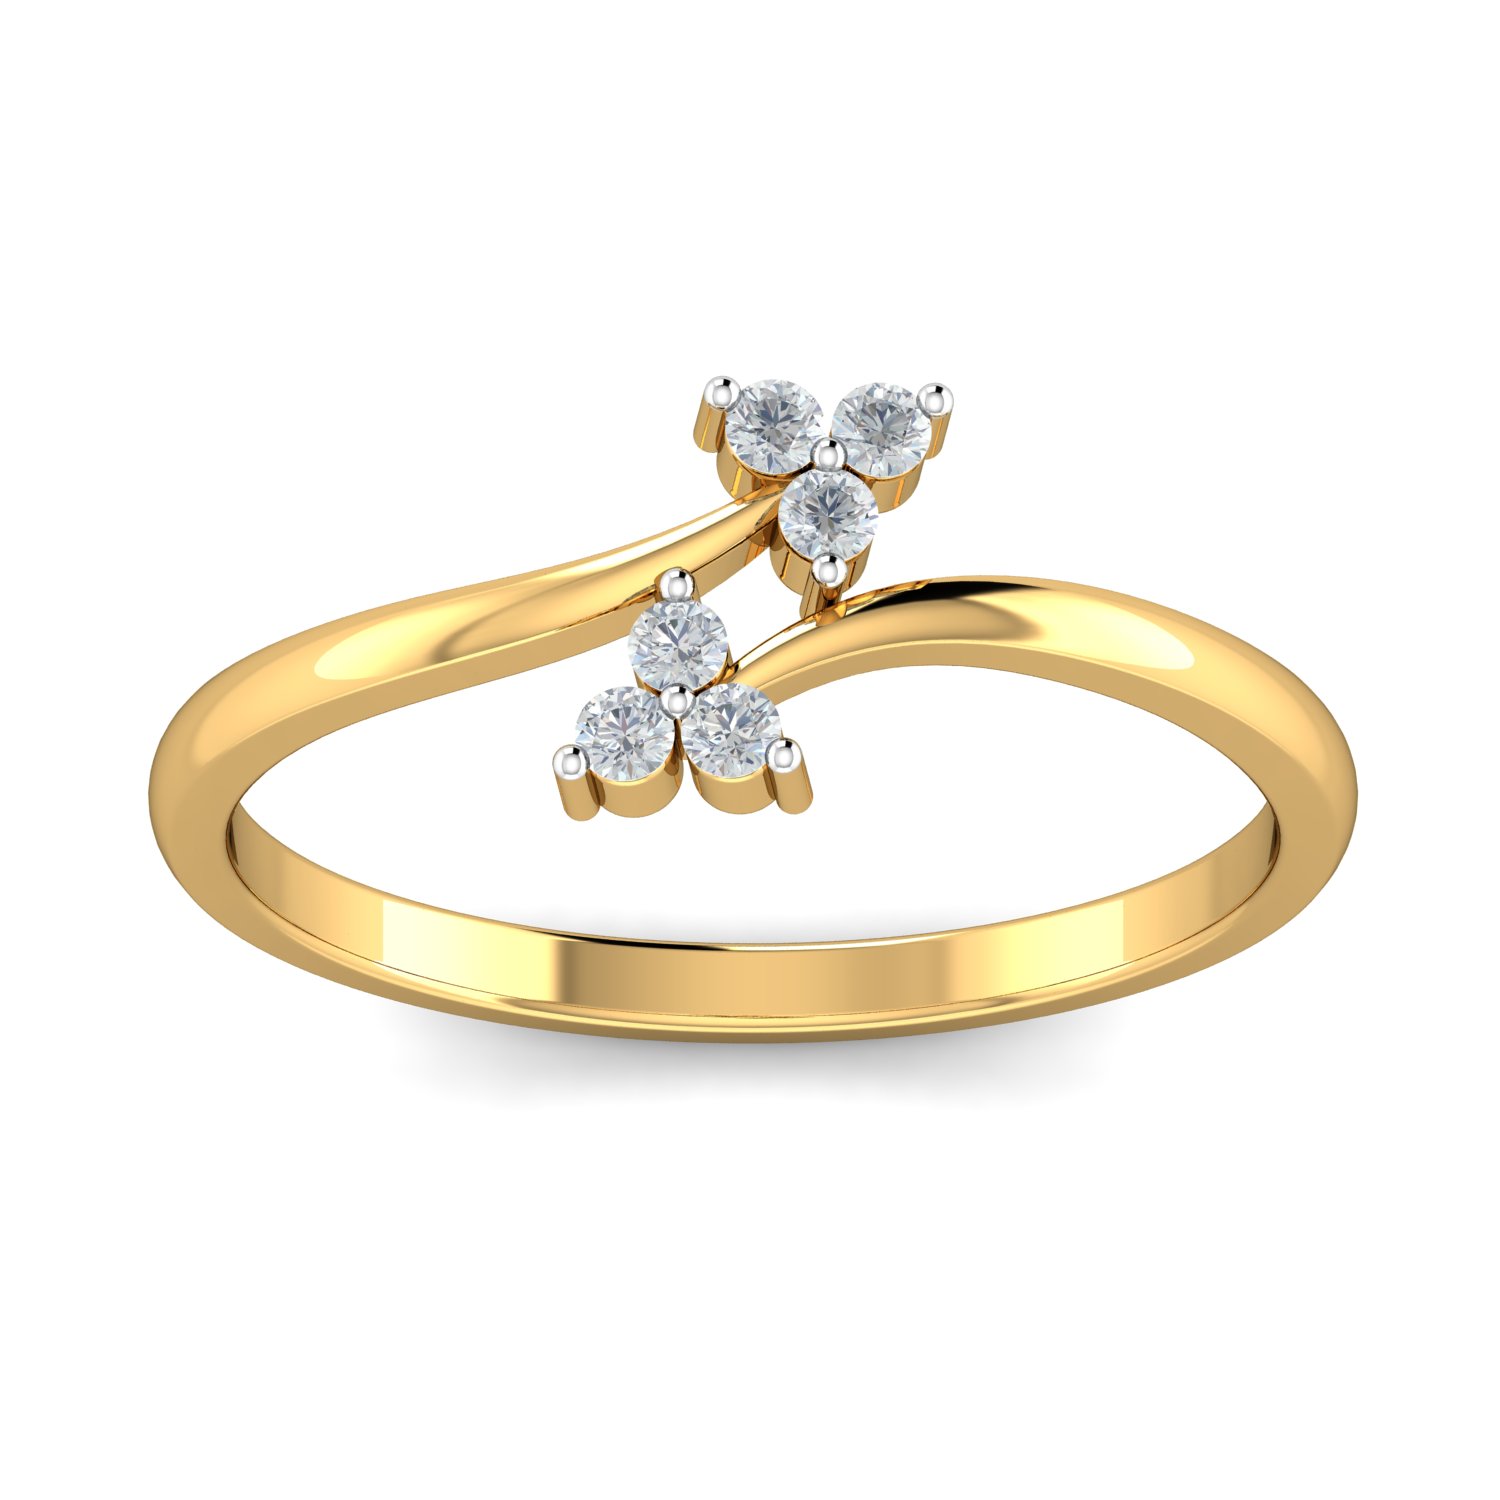 Price Of A Diamond Ring In India | Cost Of A Diamond Ring